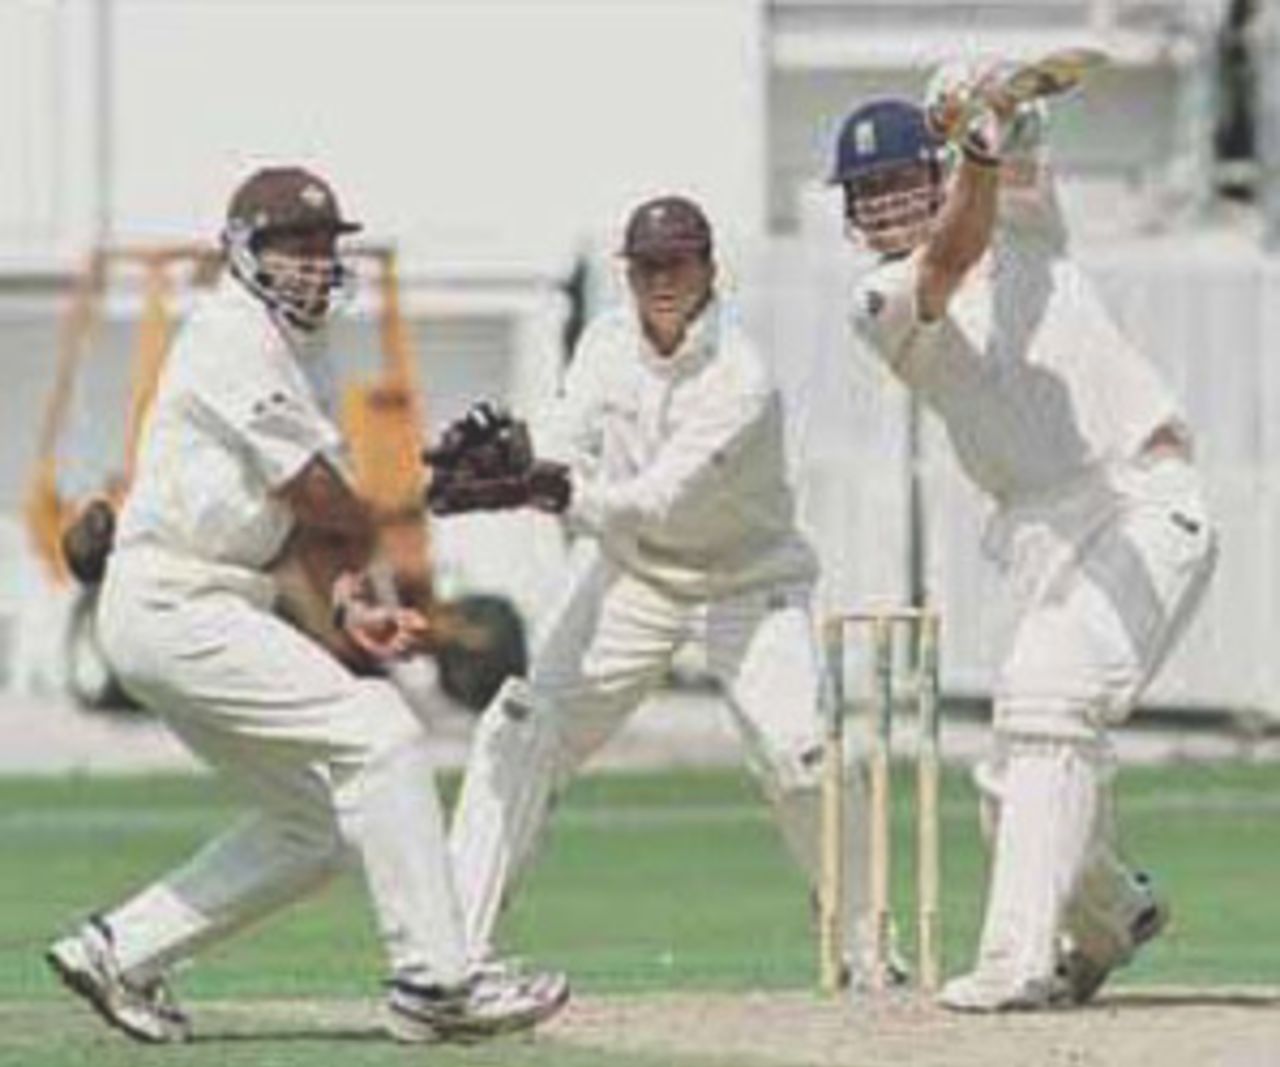 Flintoff plays the drive as Ben Hollioake takes cover, PPP healthcare County Championship Division One, 2000, Surrey v Lancashire, Kennington Oval, London, 02-05 August 2000(Day 3).